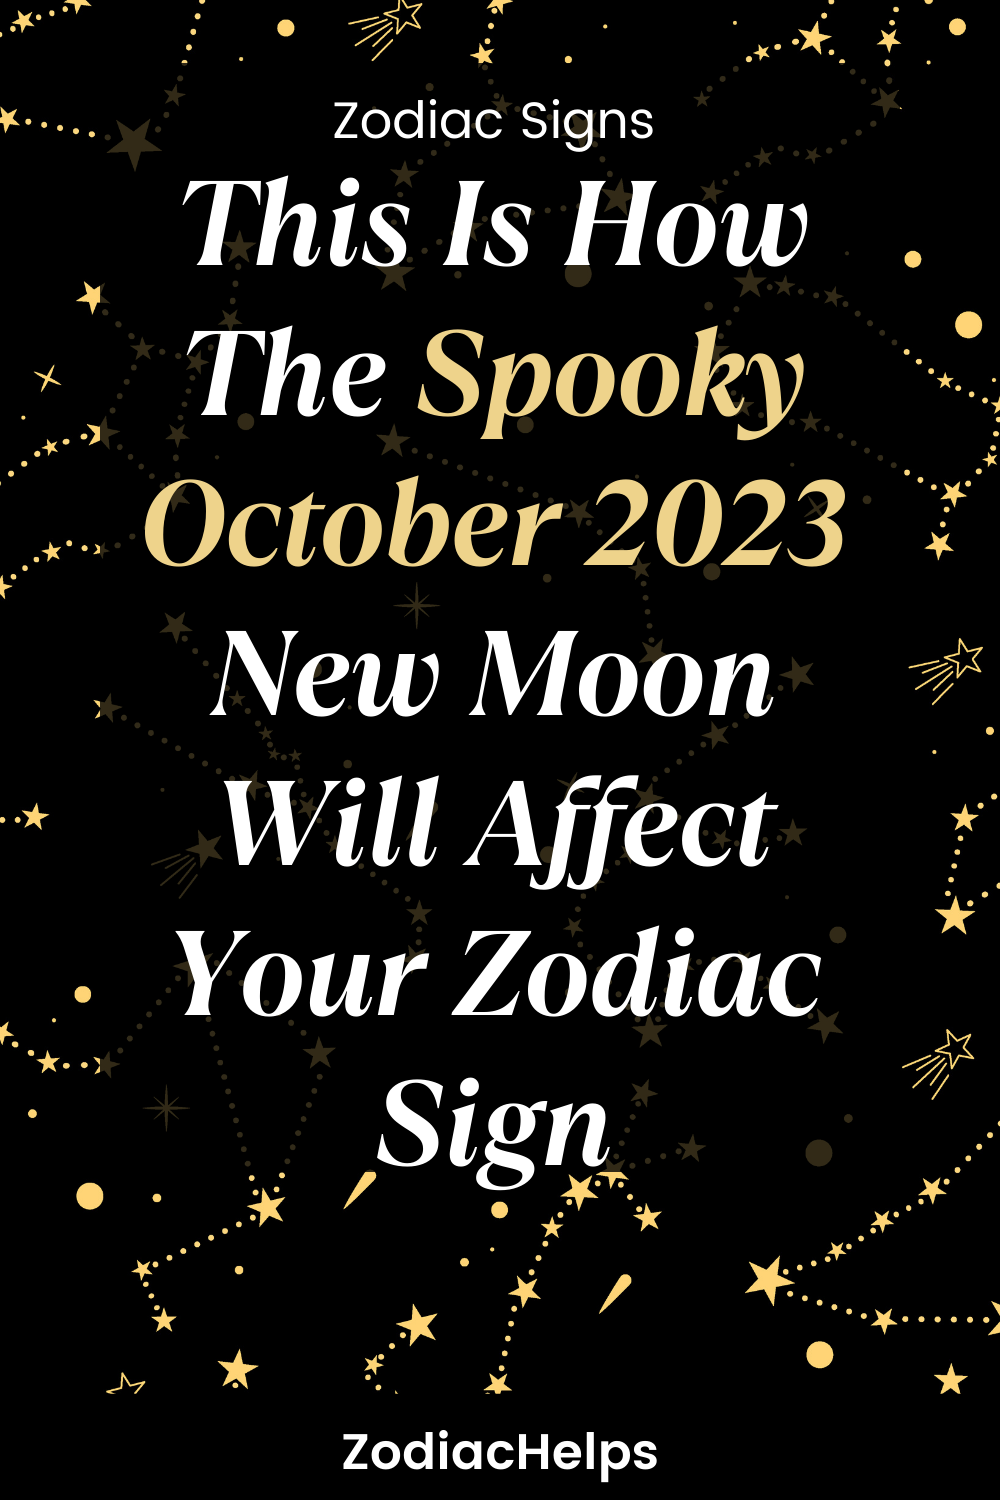 This Is How The Spooky October 2023 New Moon Will Affect Your Zodiac Sign